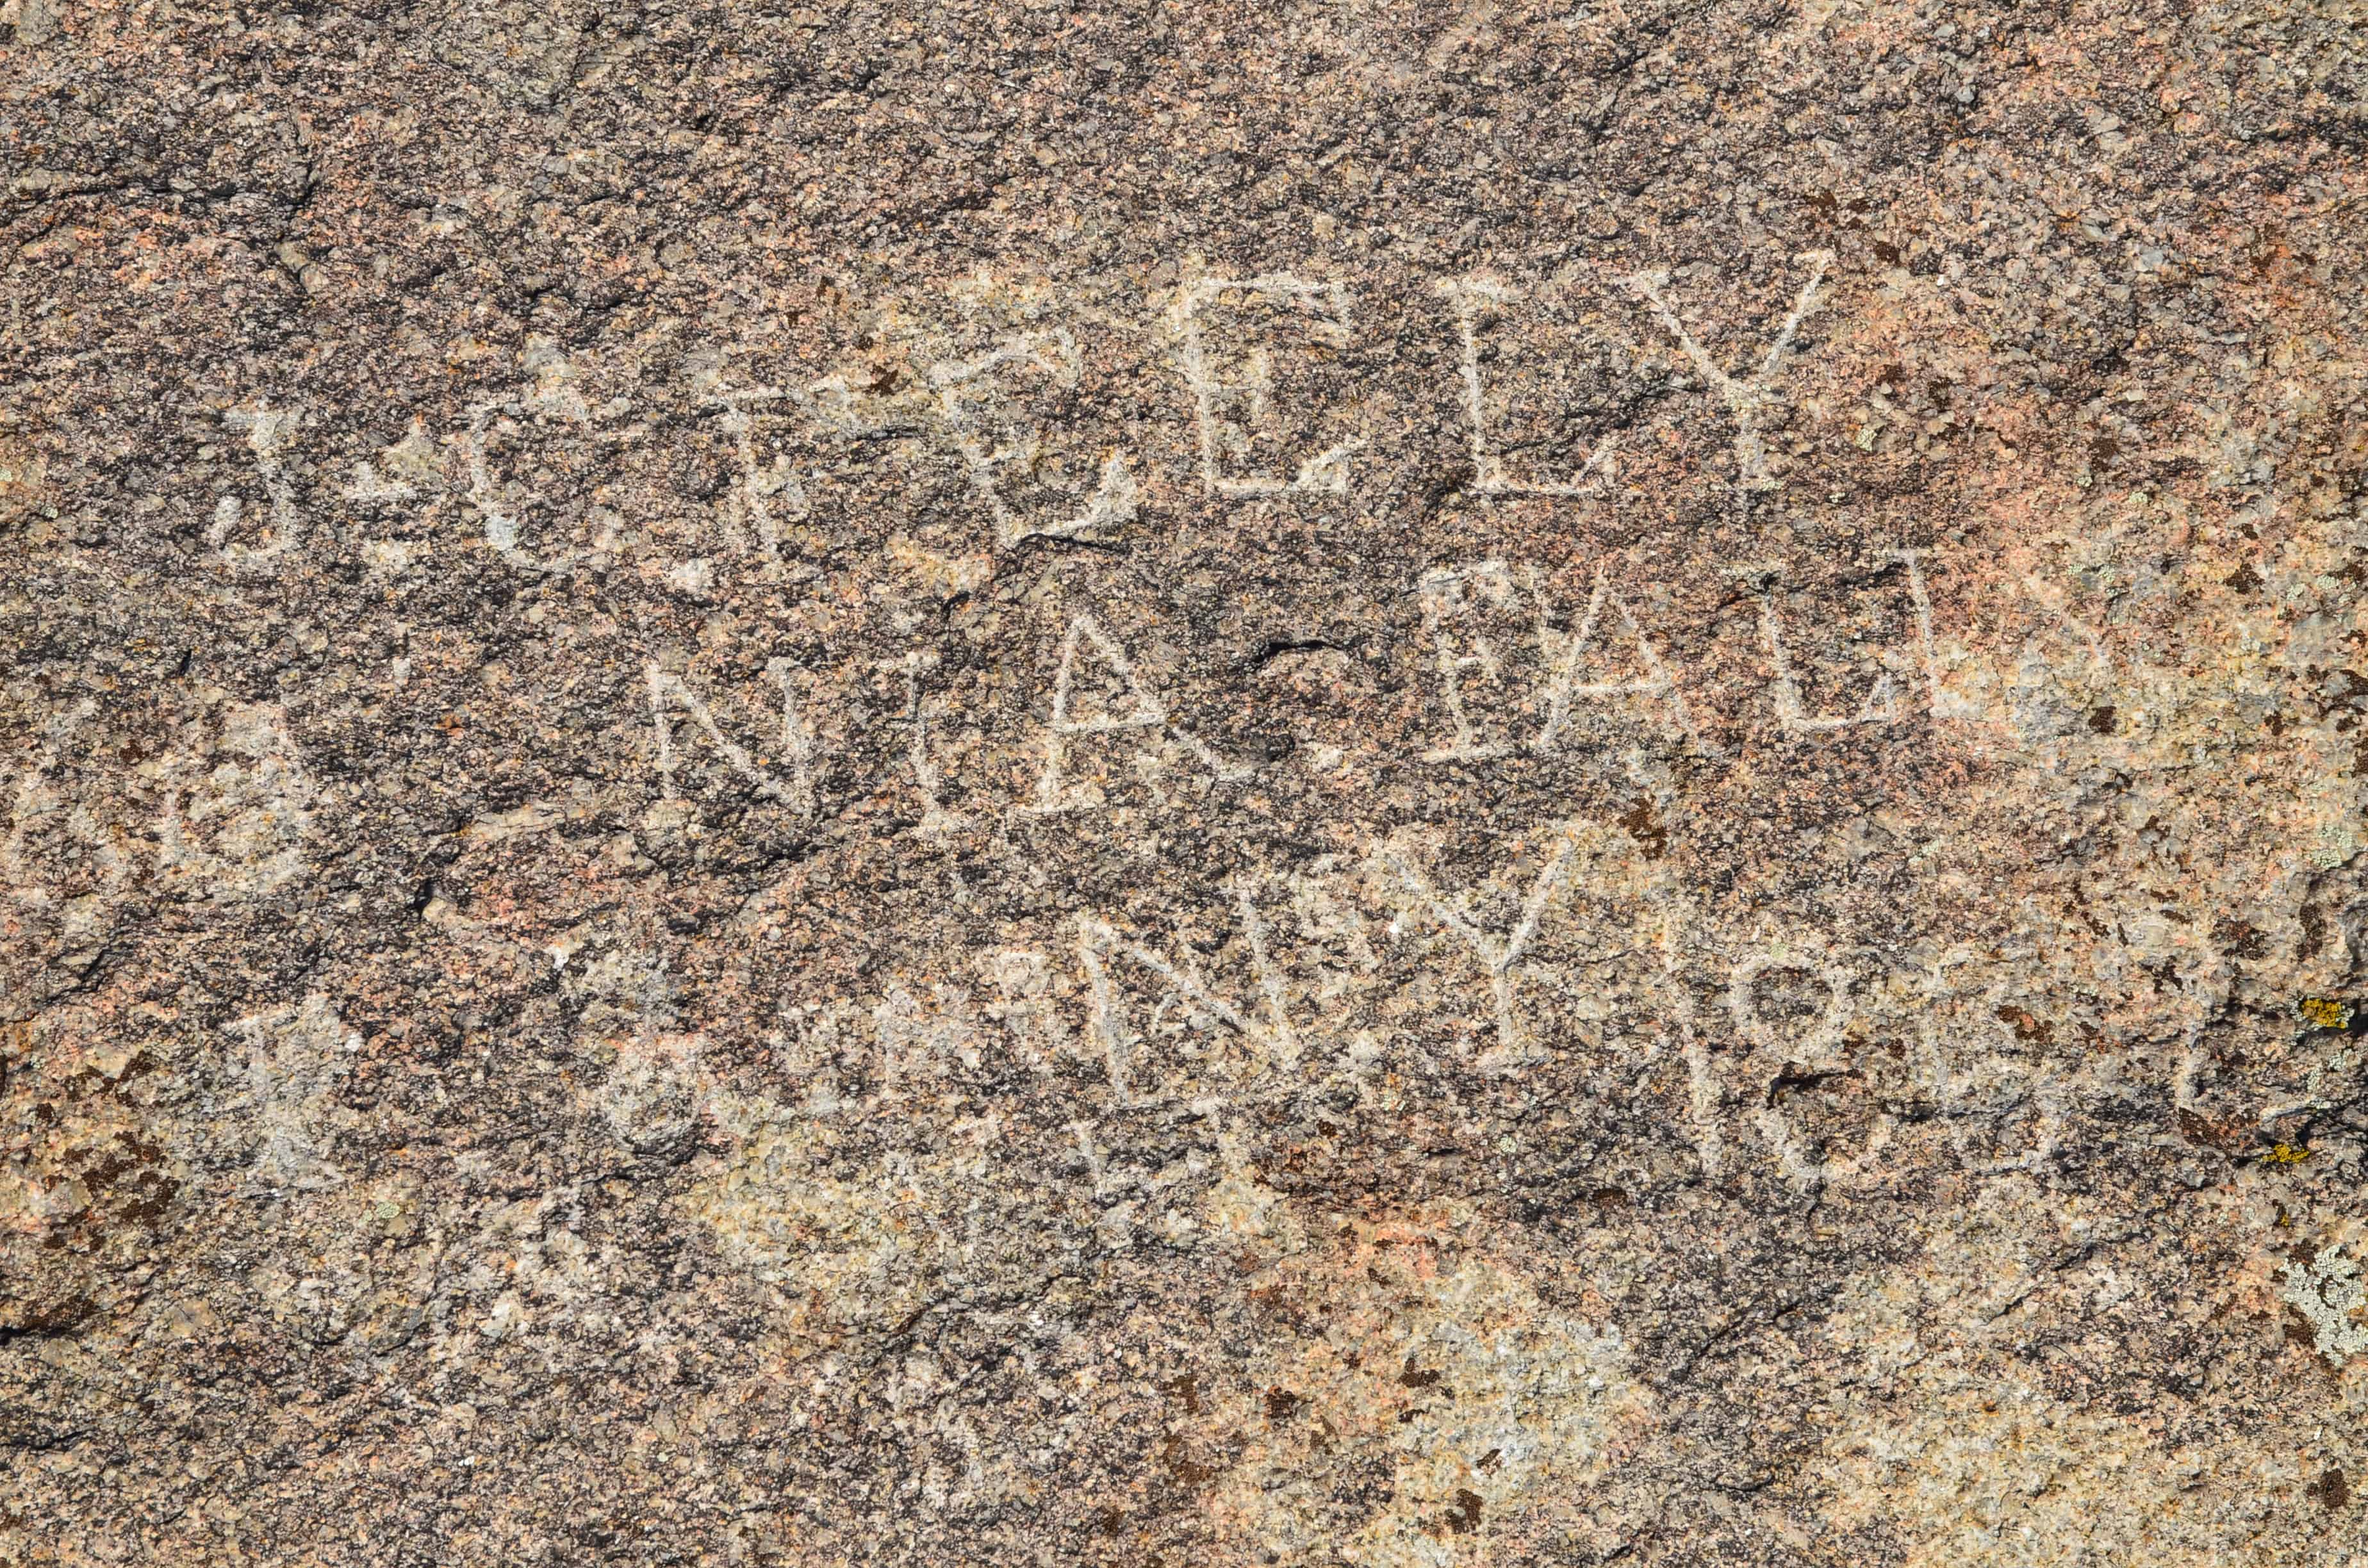 Names carved into the rock at Independence Rock State Historic Site in Wyoming